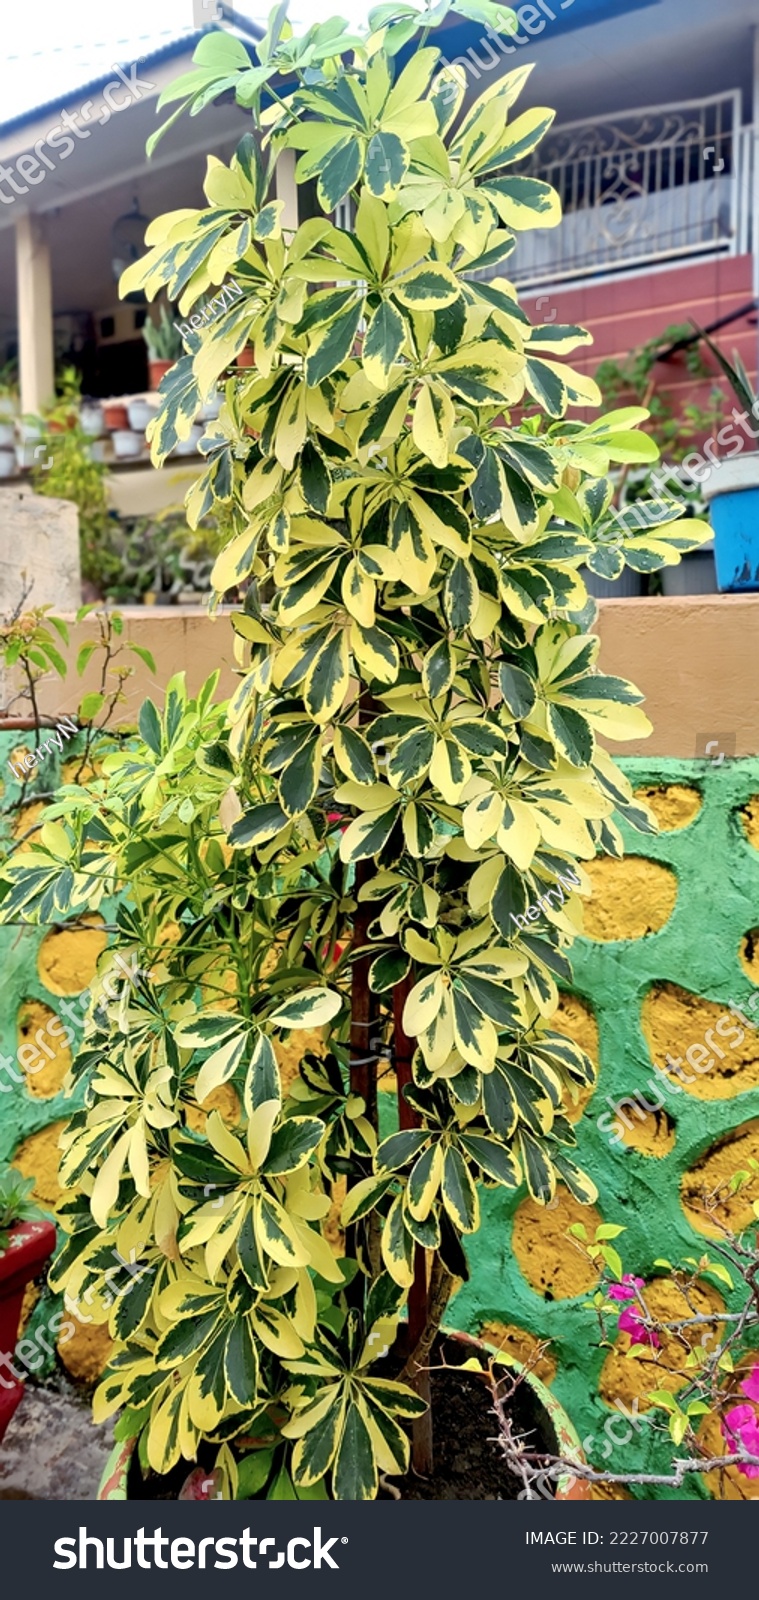 Woody plants (trees) and belong to the Araliaceae family, namely umbrella trees or octopus trees (Schefflera actinophylla). #2227007877